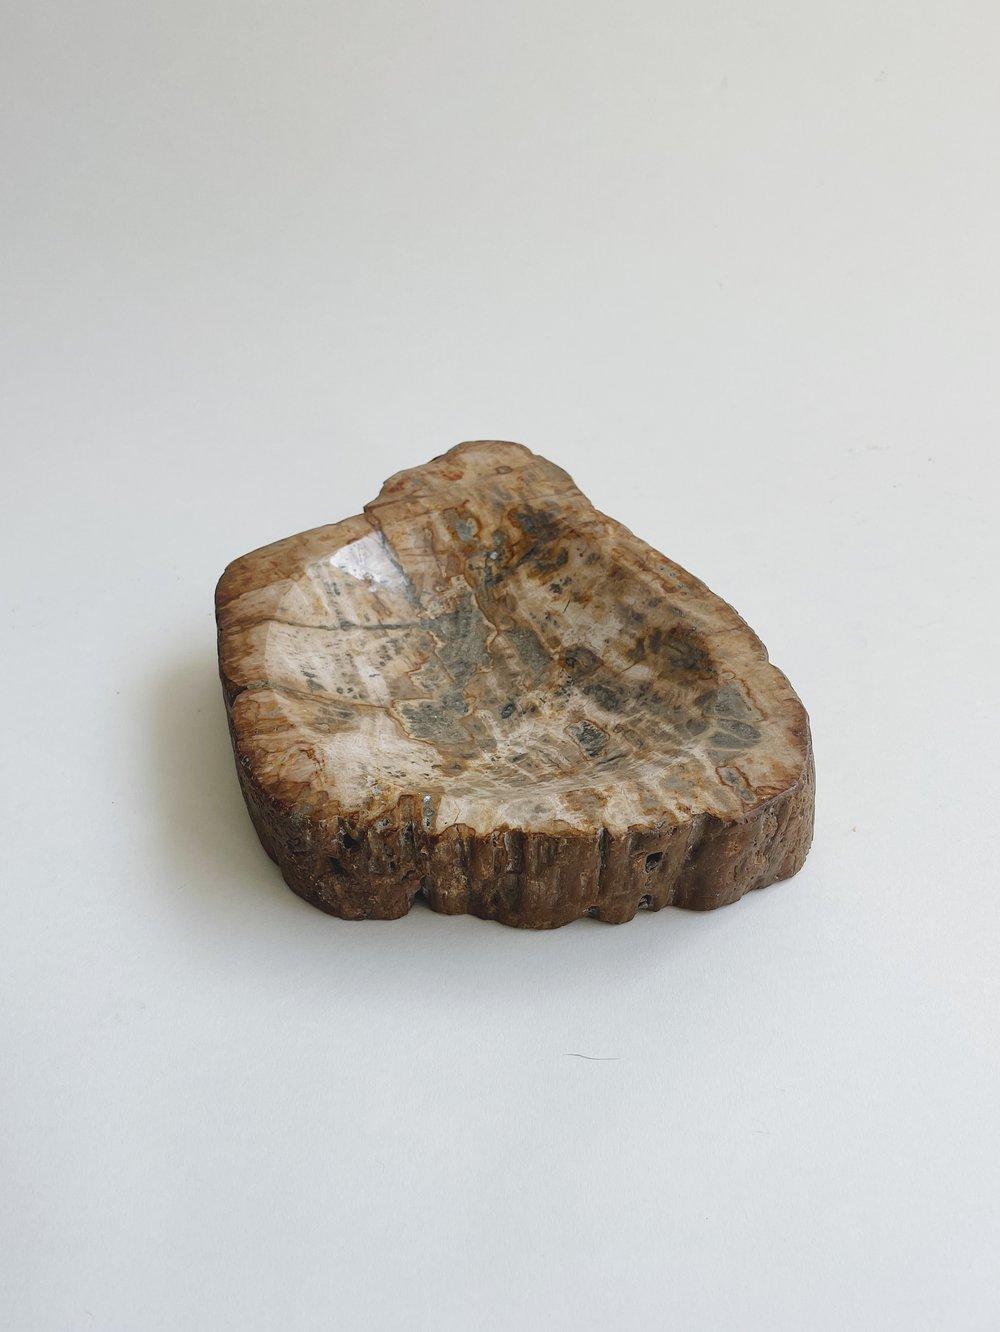 Very smooth petrified wood slab with a shallow basin for use as a catchall or ashtray.

Measures 9” long by 7” wide and 2” tall.

Great condition, very heavy.